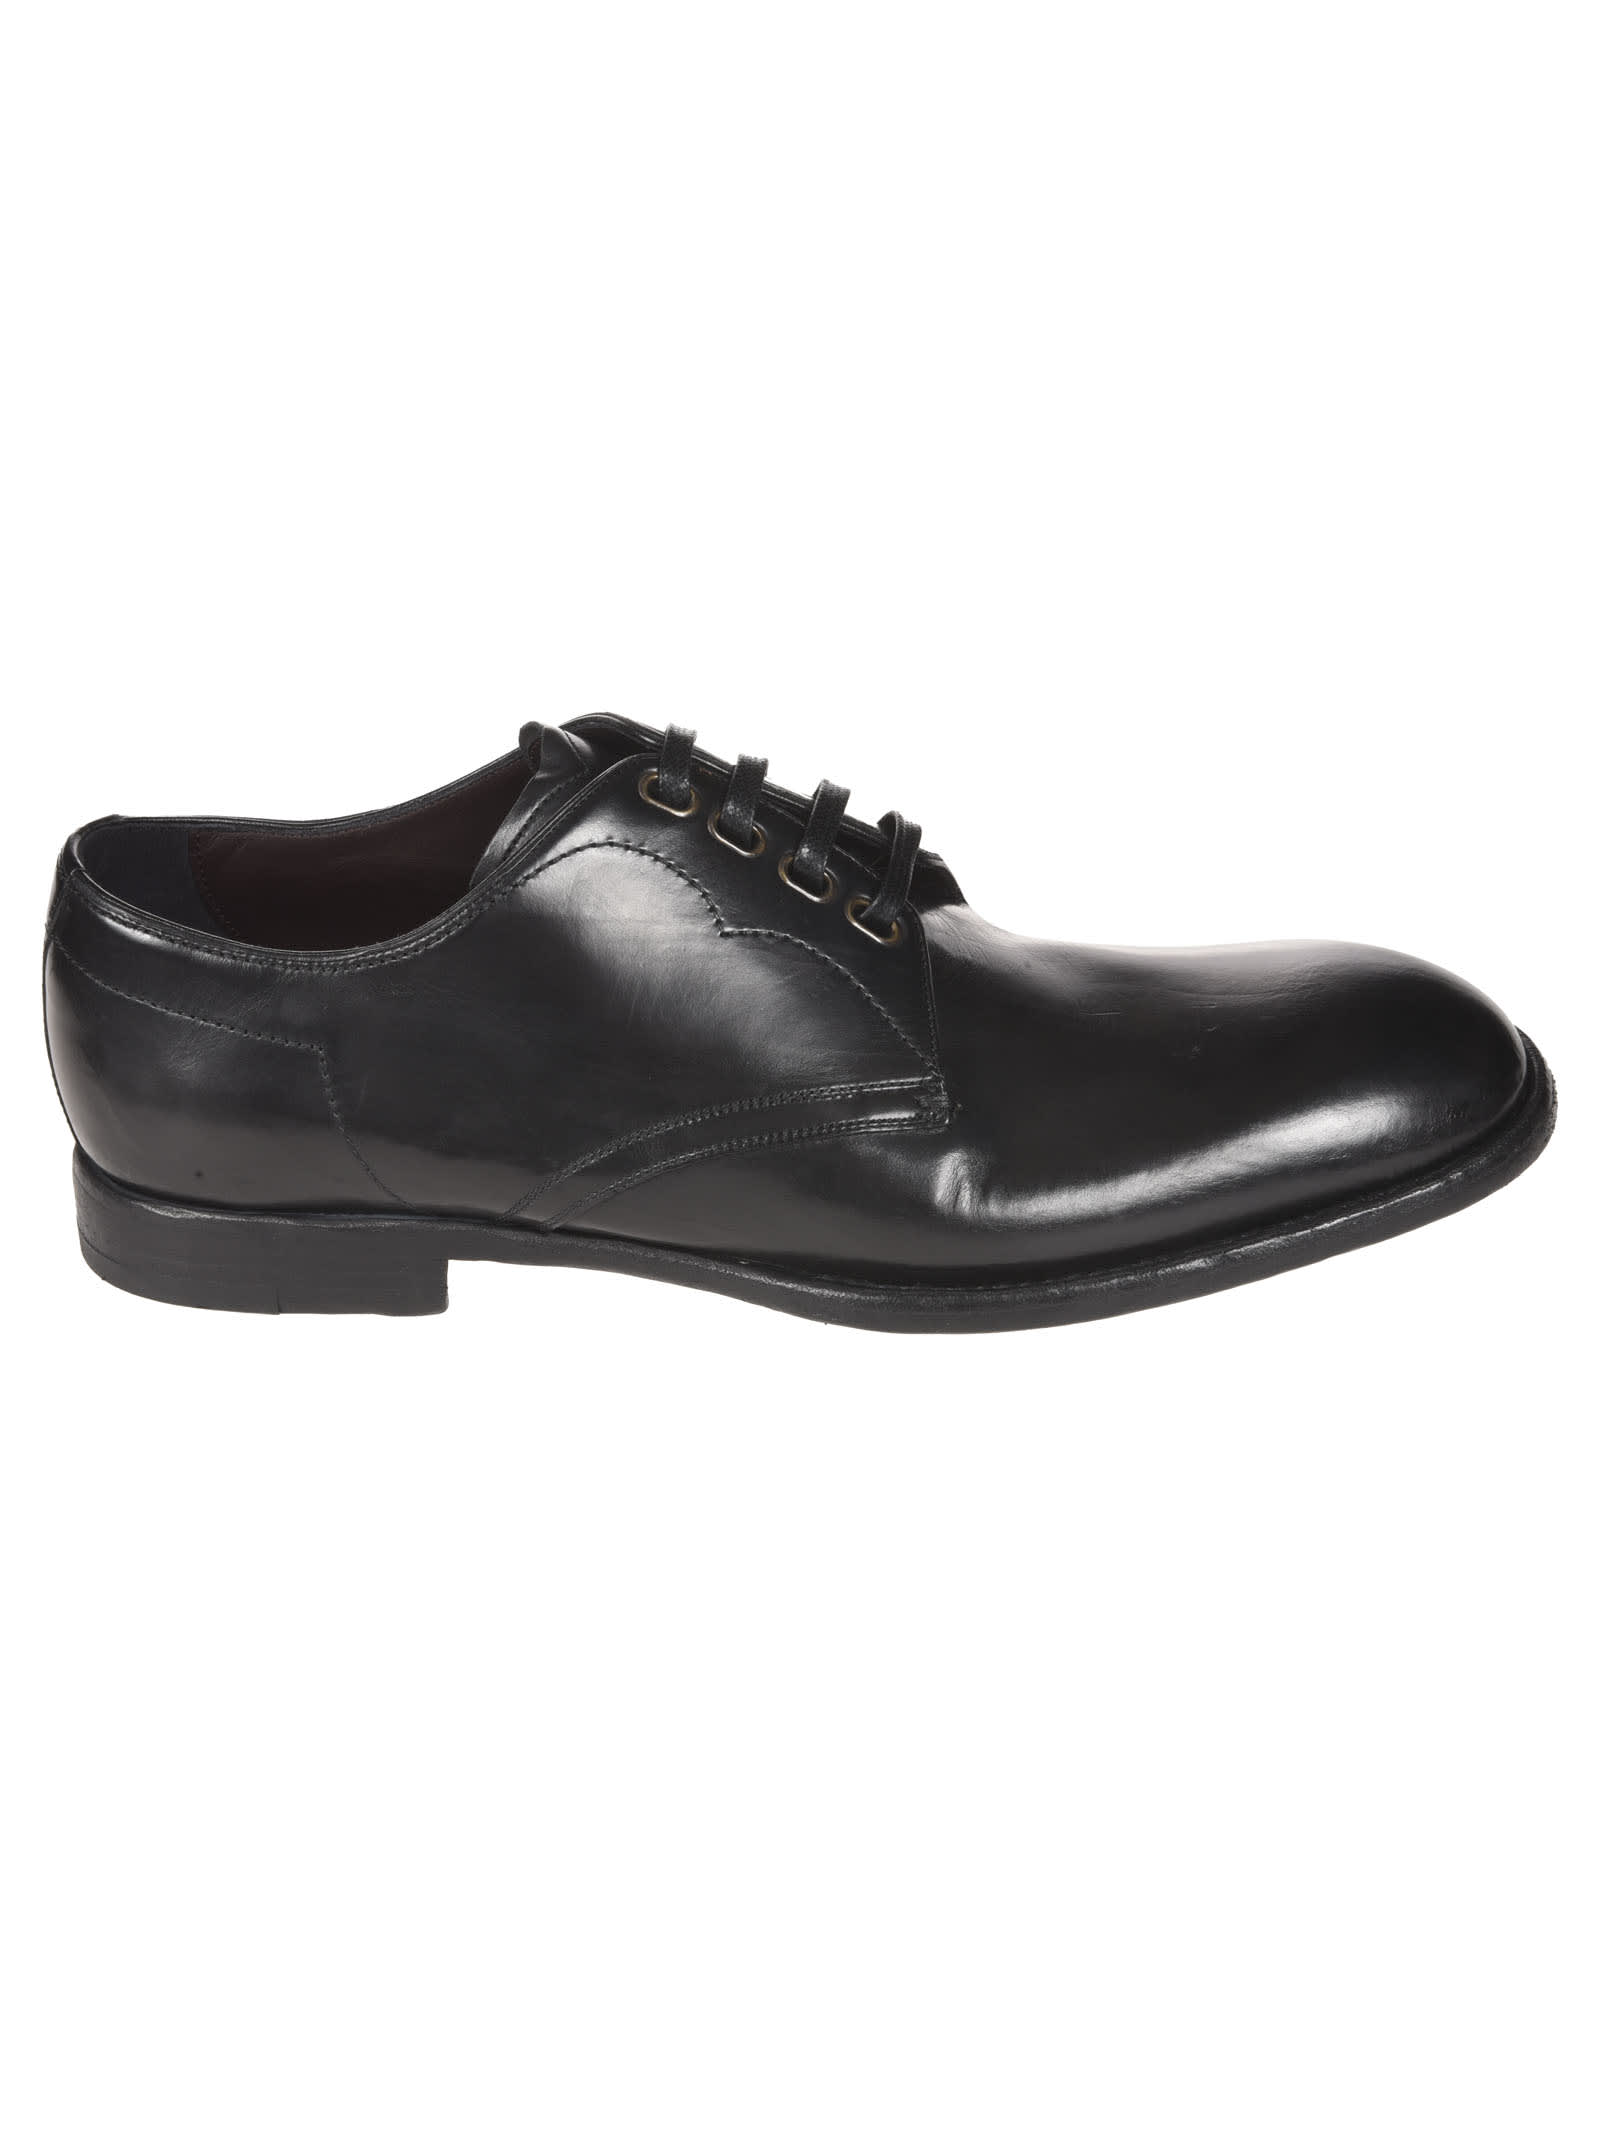 DOLCE & GABBANA ROUND TOE OXFORD SHOES,A10666 A182880999